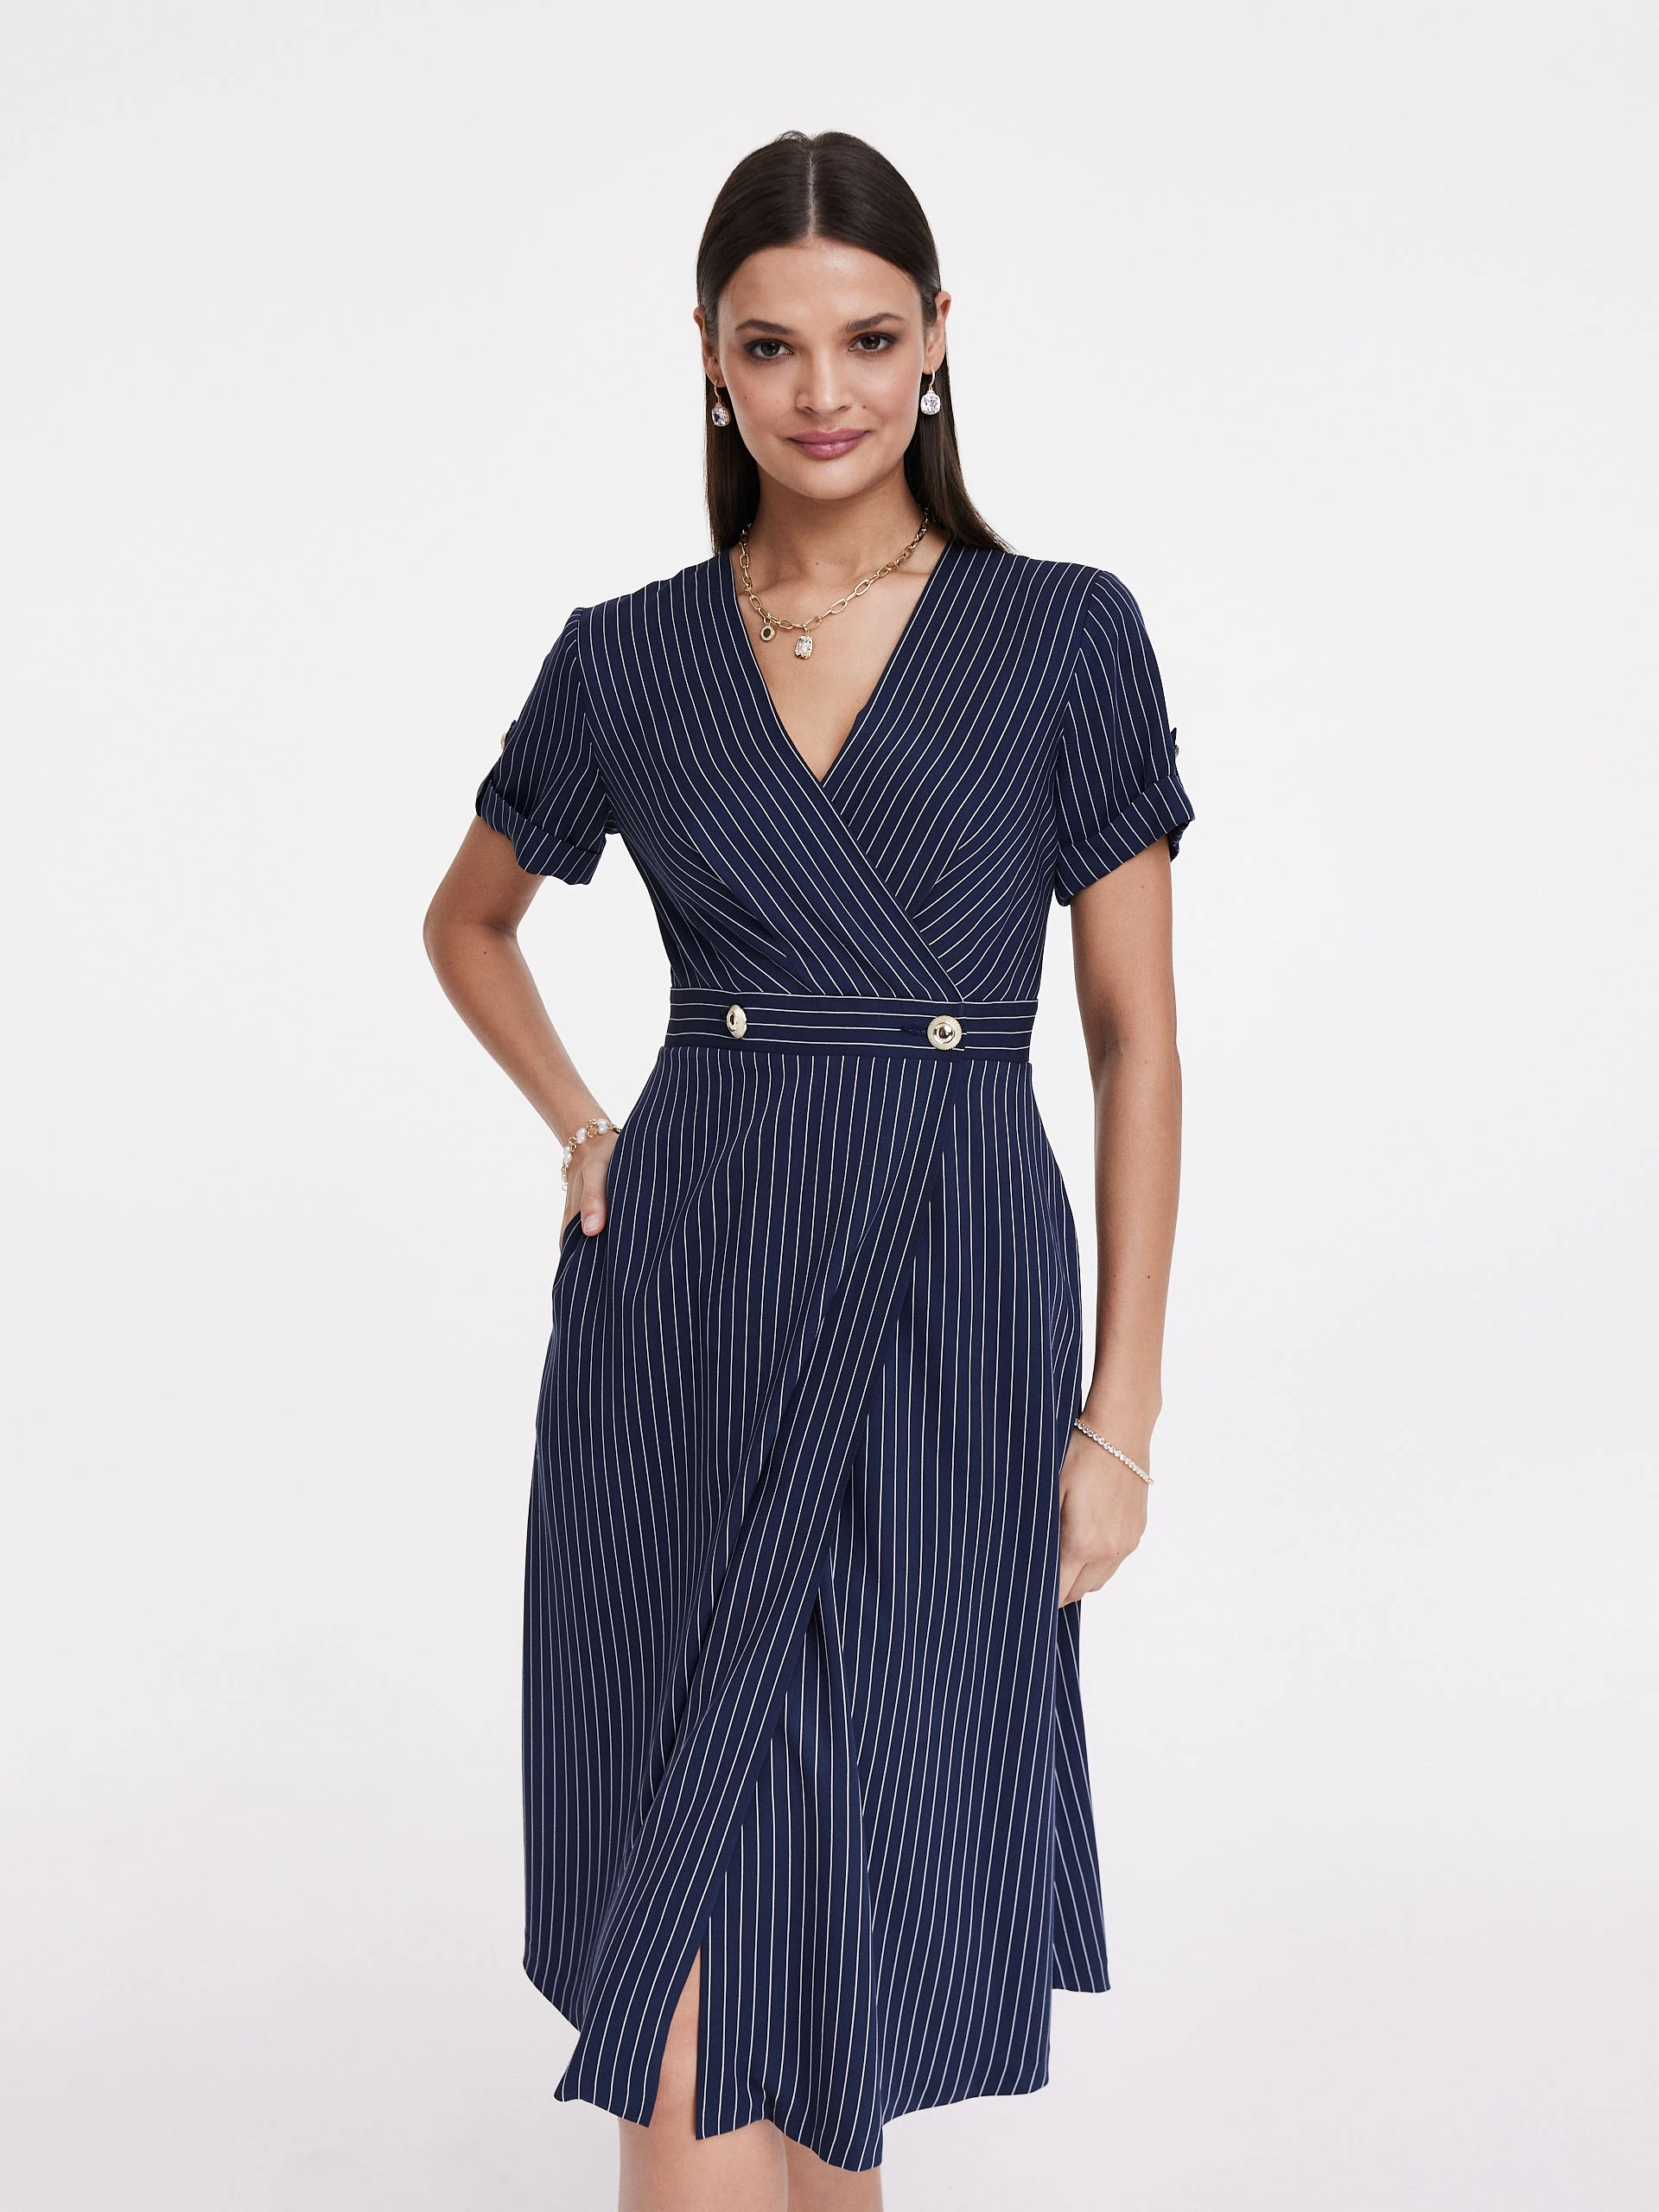 Navy blue dress with white stripes